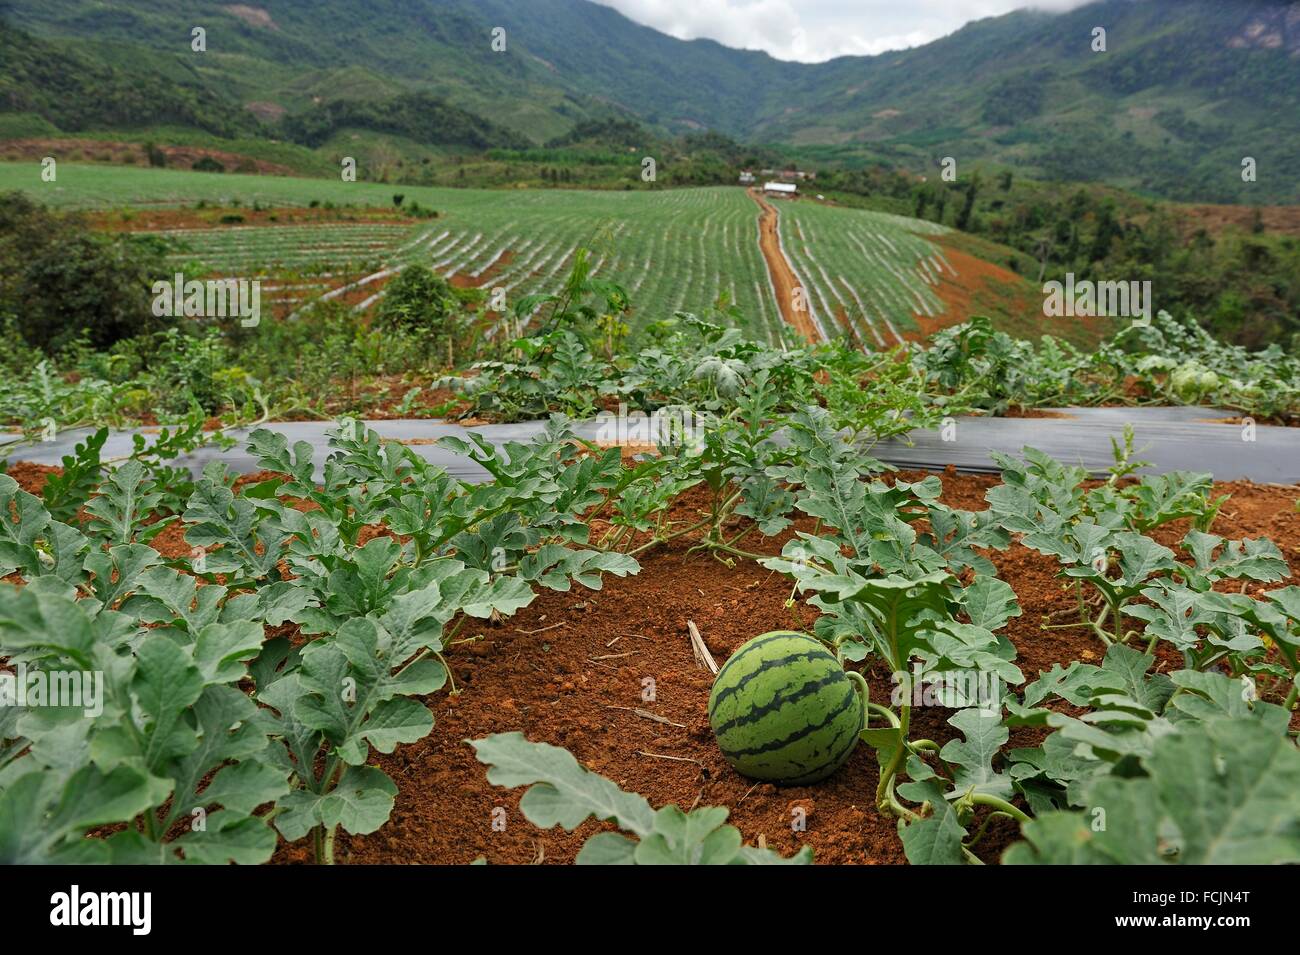 watermelon crop on lands bought or rented by China for Chinese market, Nong Khiaw area, northern Laos, Southeast Asia. Stock Photo